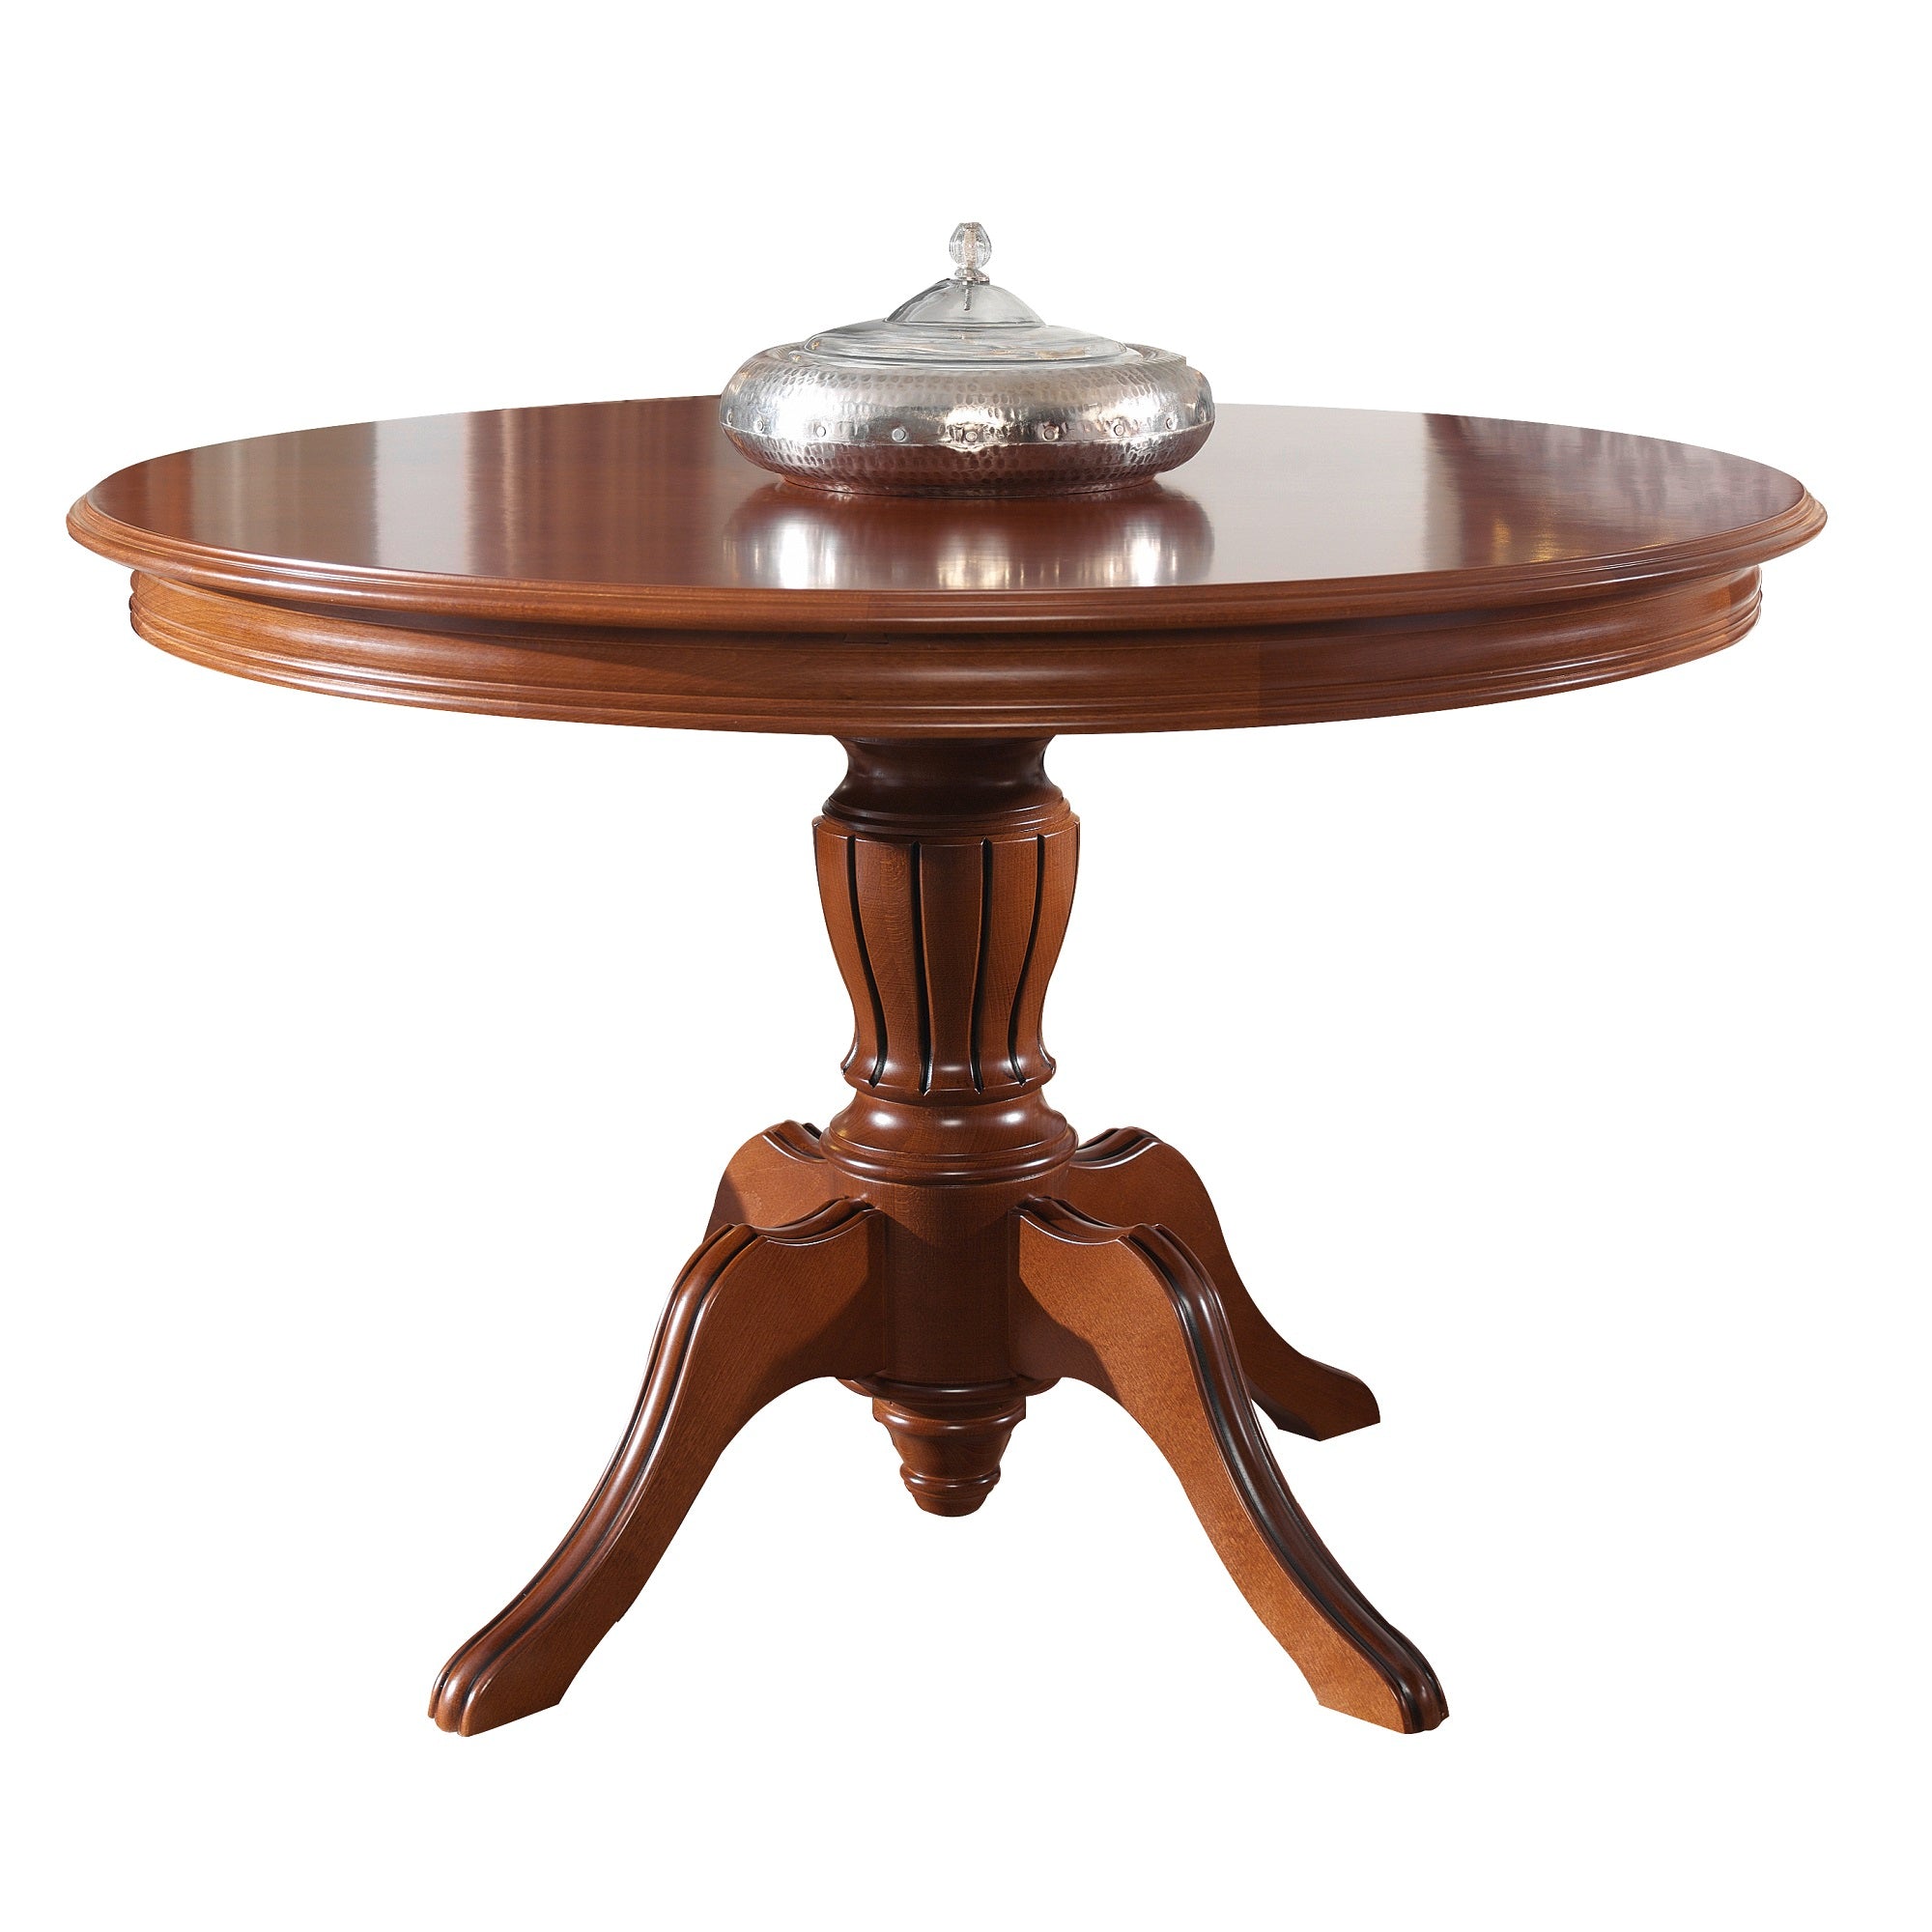 Sofia Round Solid Wood Dining Table - Furniture.Agency